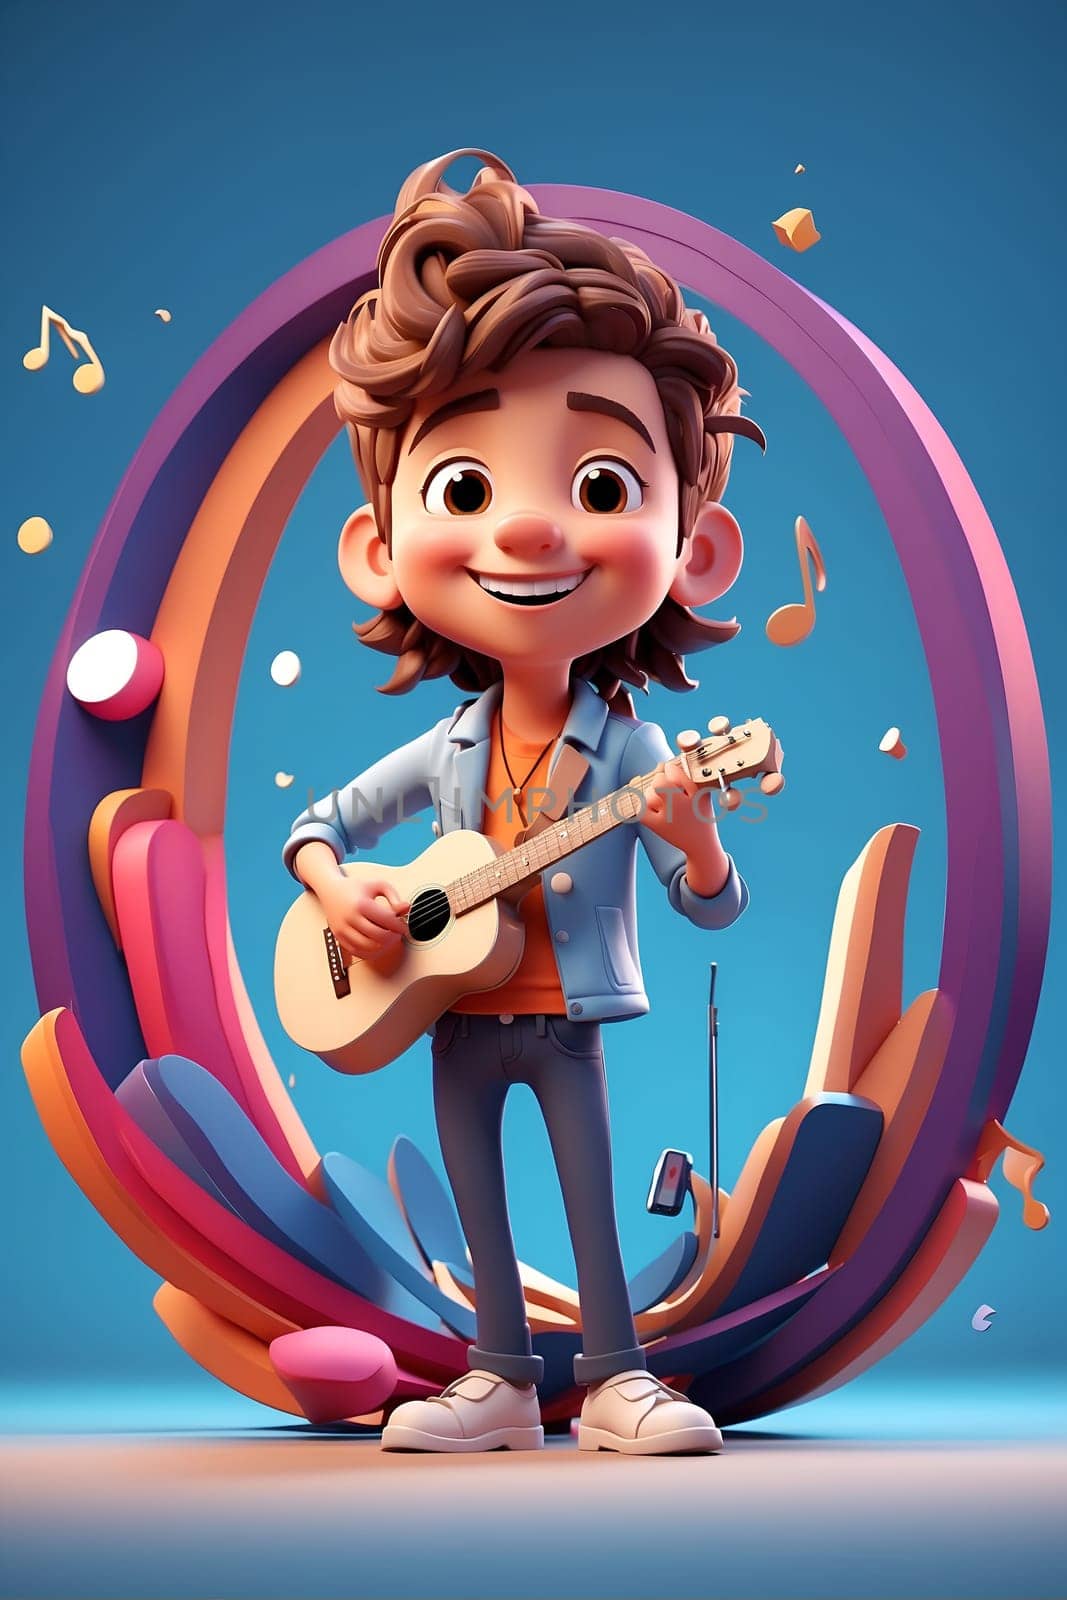 A lively cartoon character energetically strums a guitar, captured against a captivating blue background.